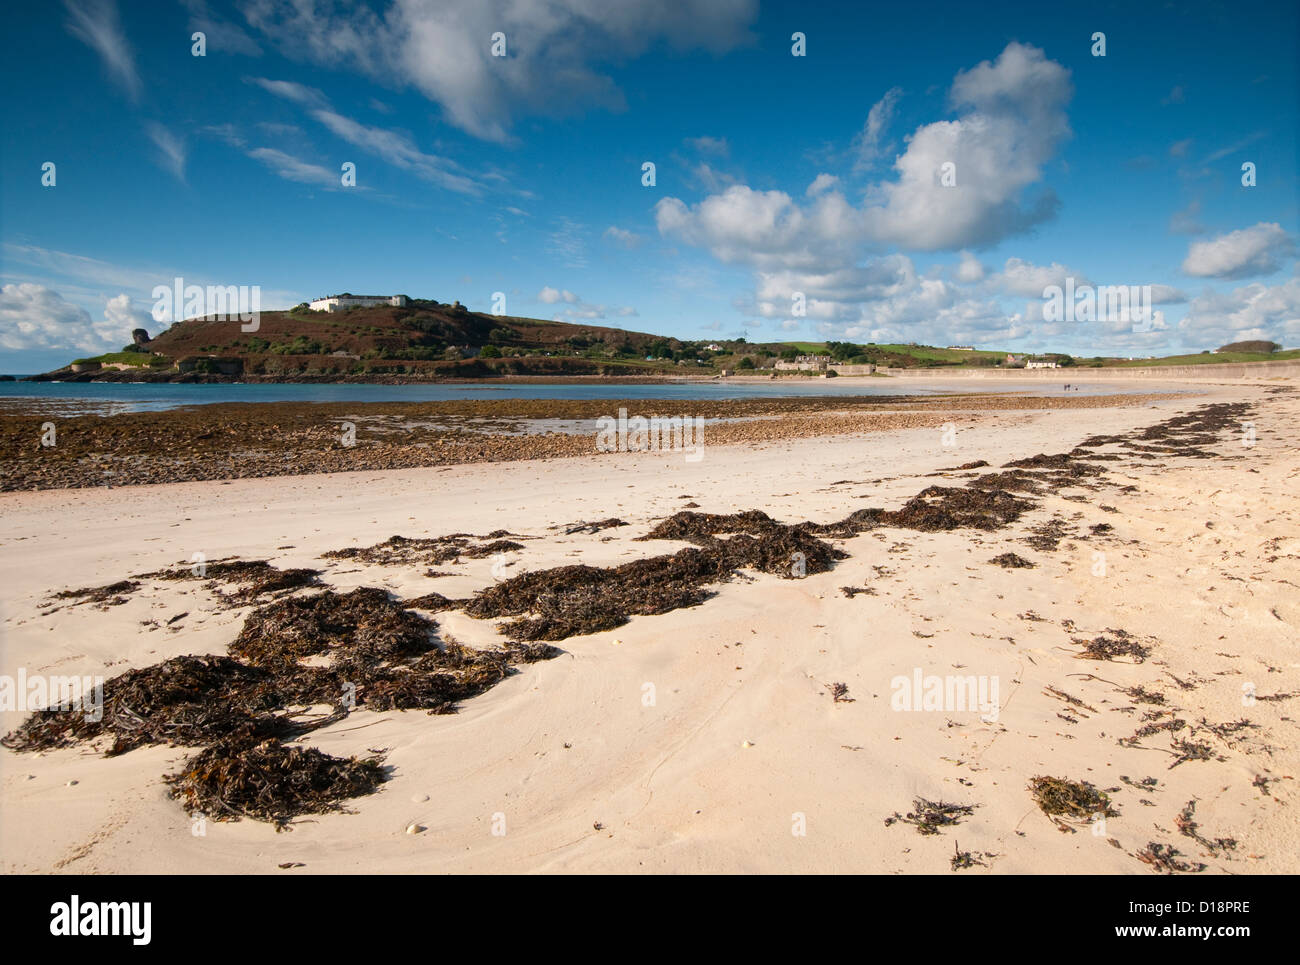 Essex Castle and Longis Beach on Alderney, Channel Islands Stock Photo